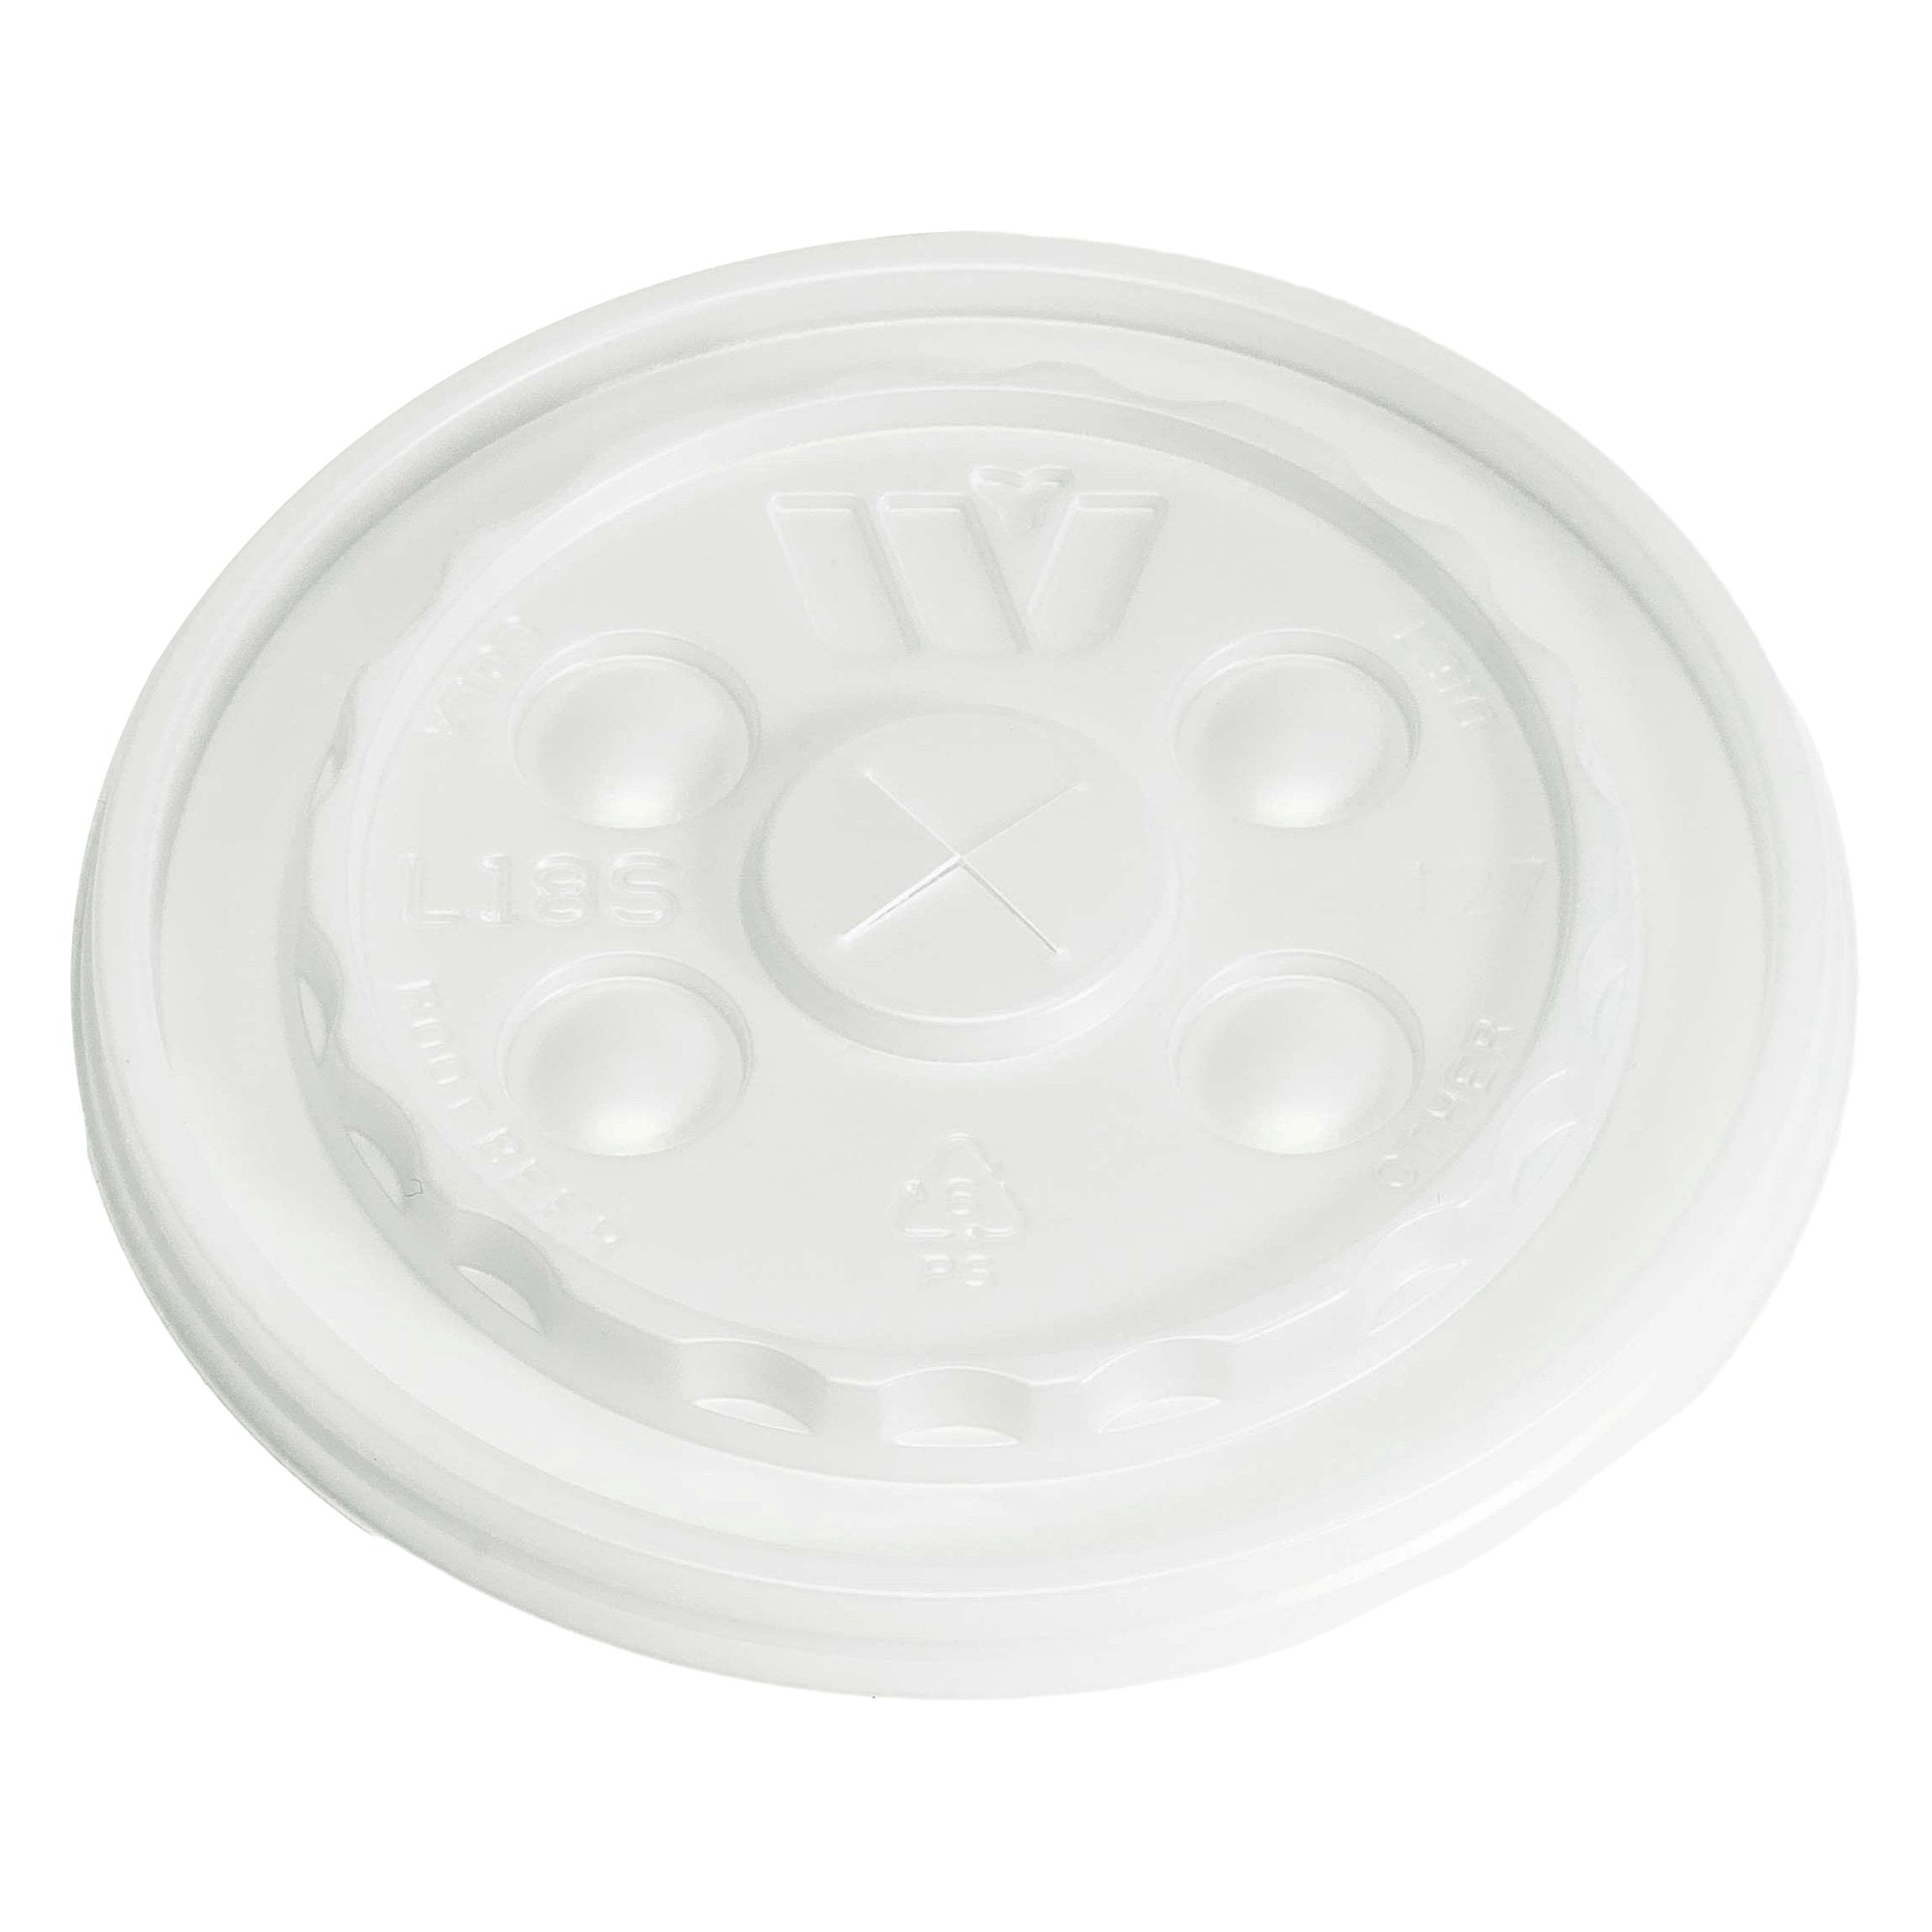 Drinking Cup Slotted Lid WinCup®